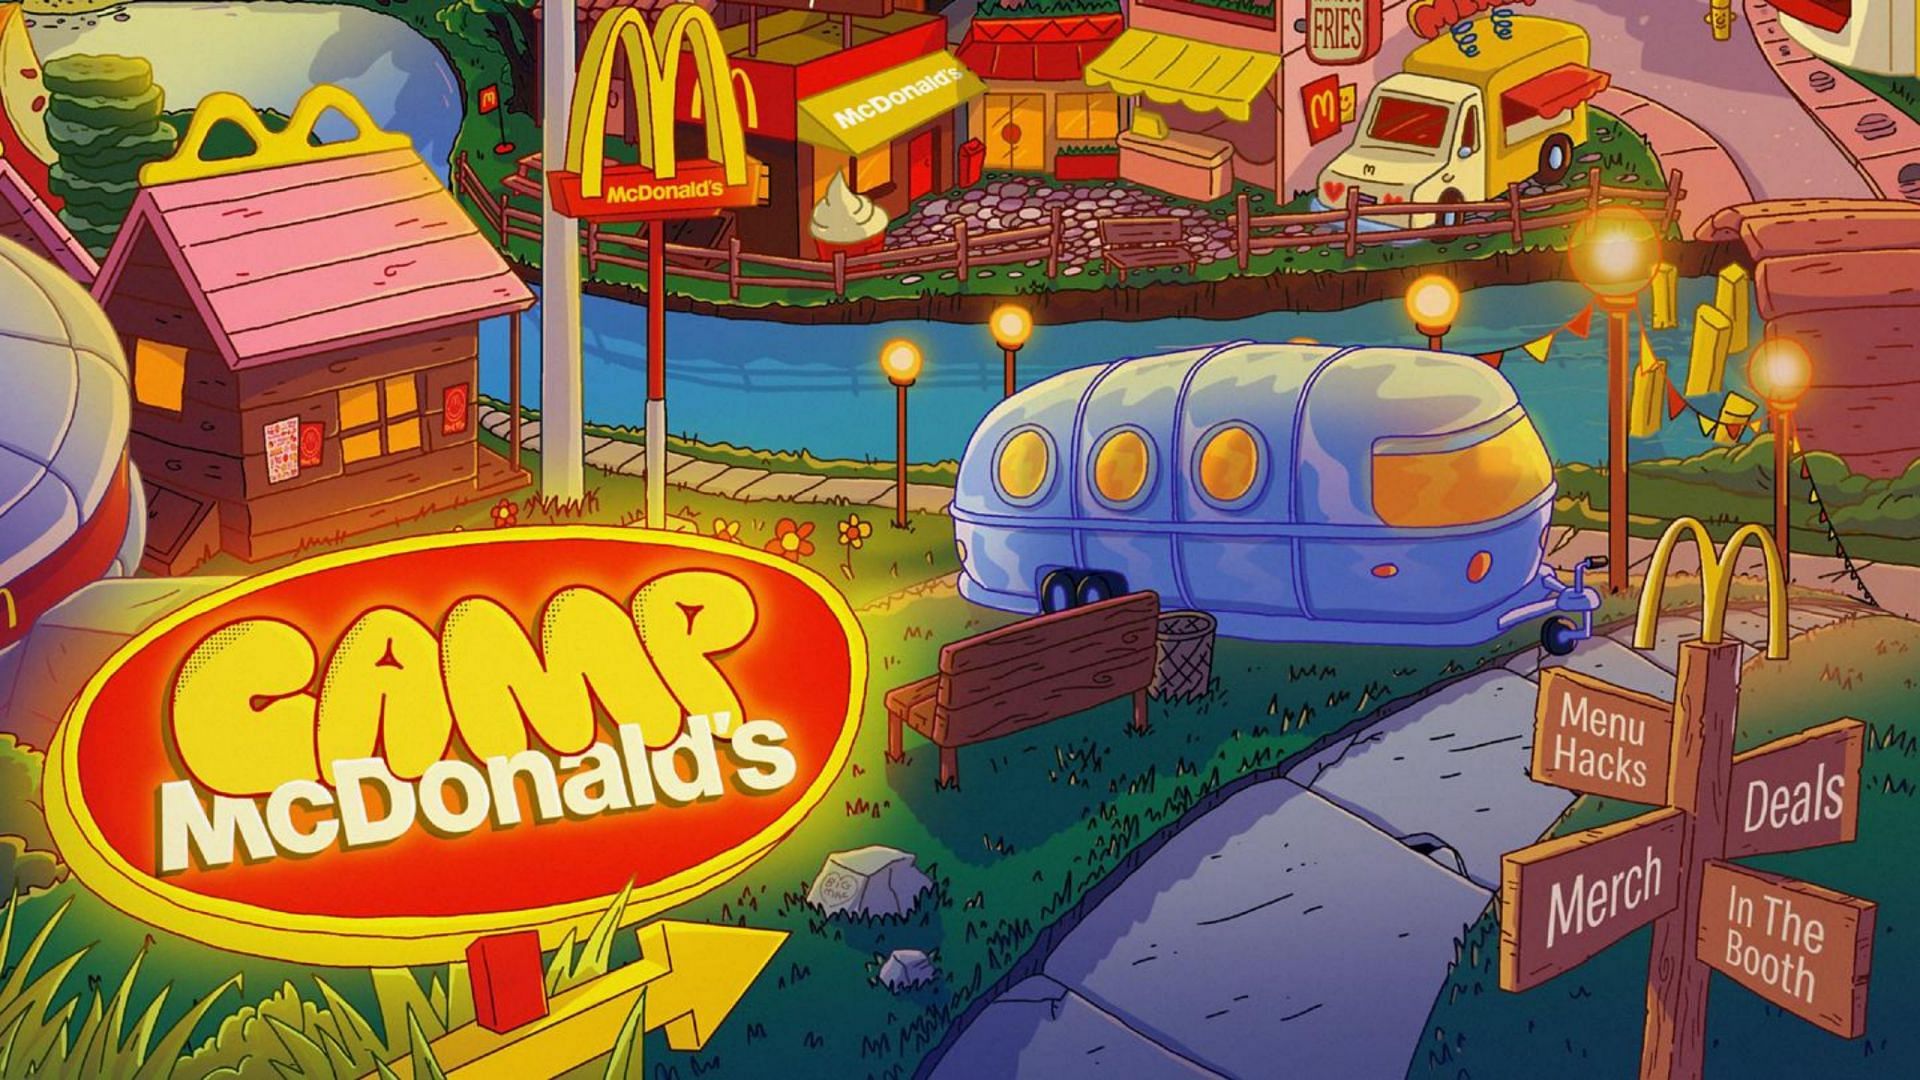 A 27 day campaign,&ldquo;Camp McDonald&rsquo;s,&rdquo; has several exciting offers for customers (Image via McDonald&rsquo;s)